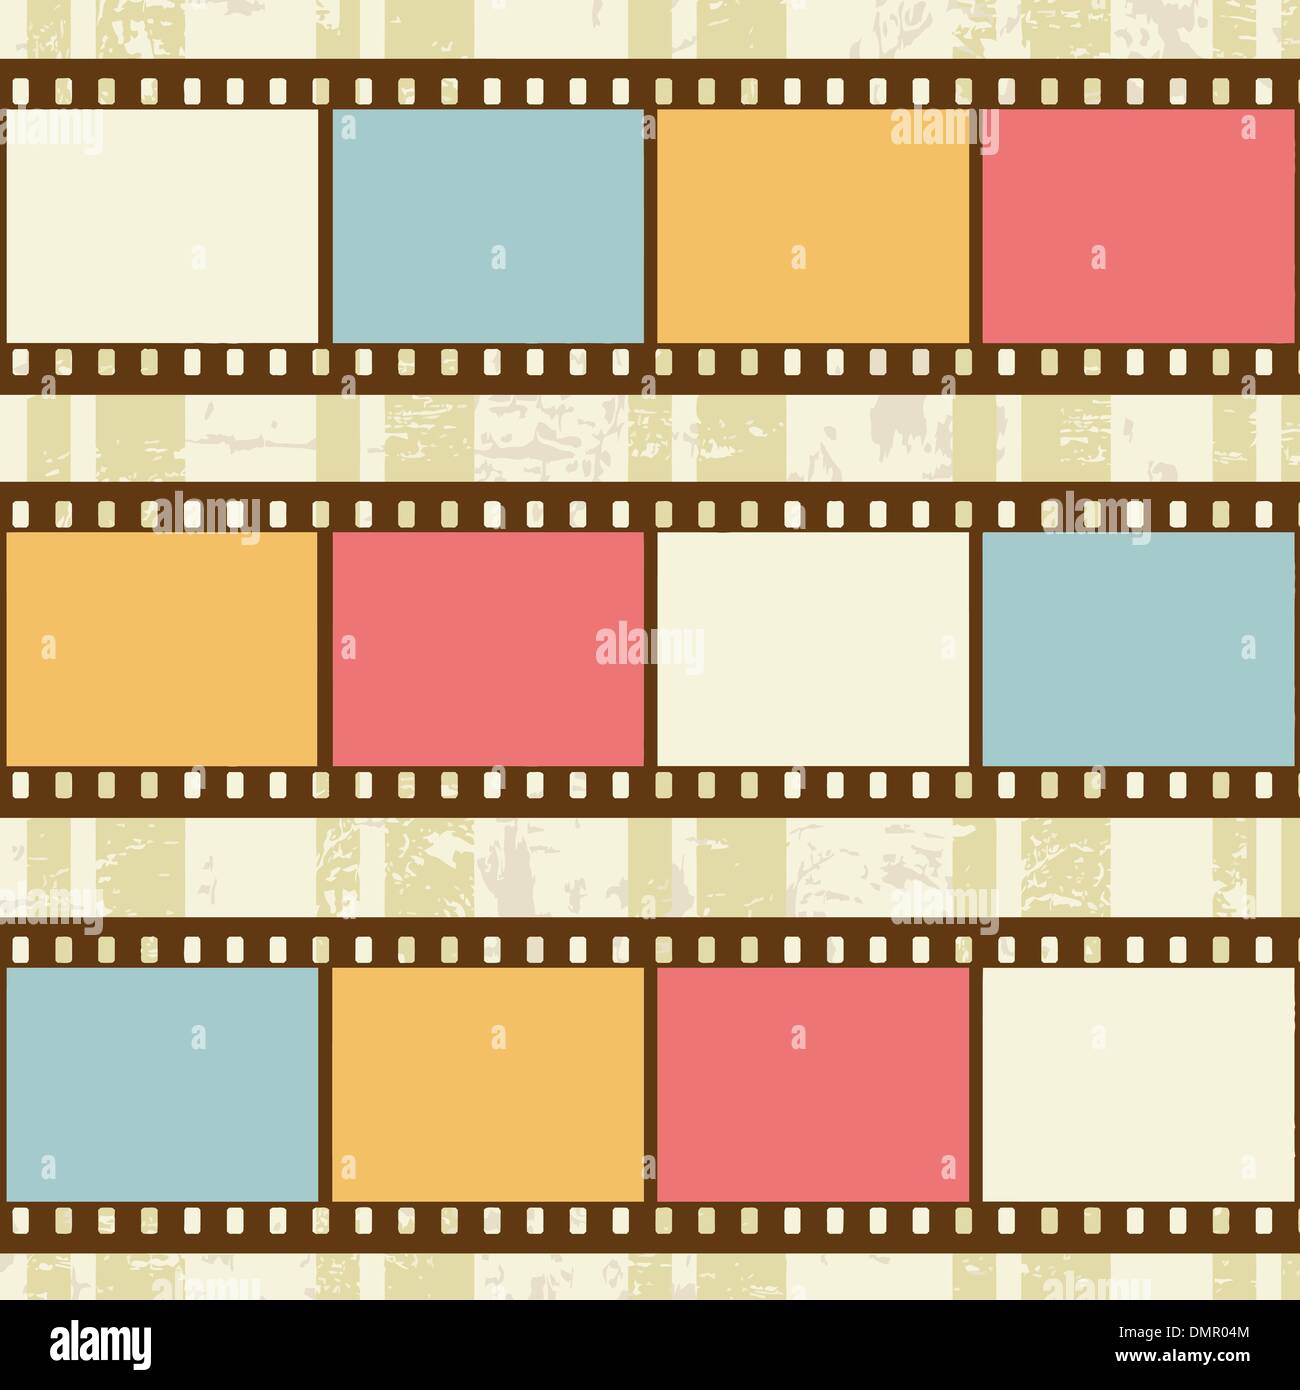 Retro background with film strips Stock Vector